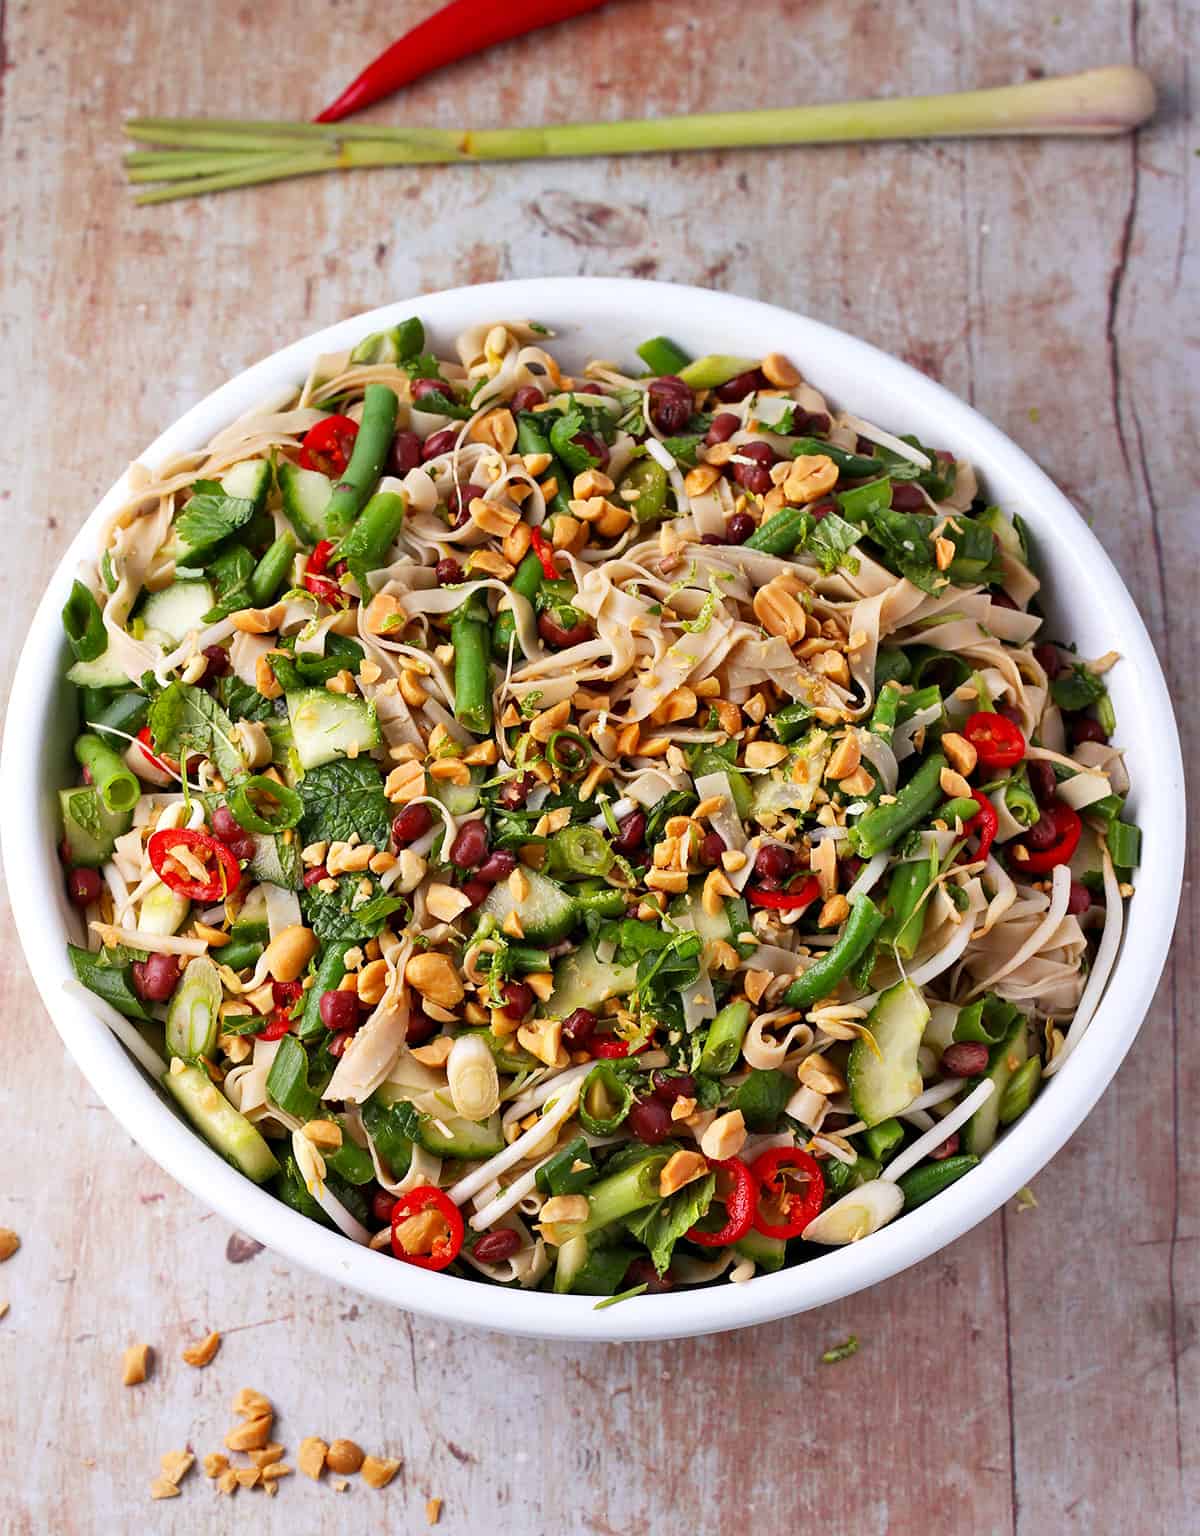 A white salad bowl is filled with green vegetables, adzuki beans, sliced red chilis, and chopped peanuts.